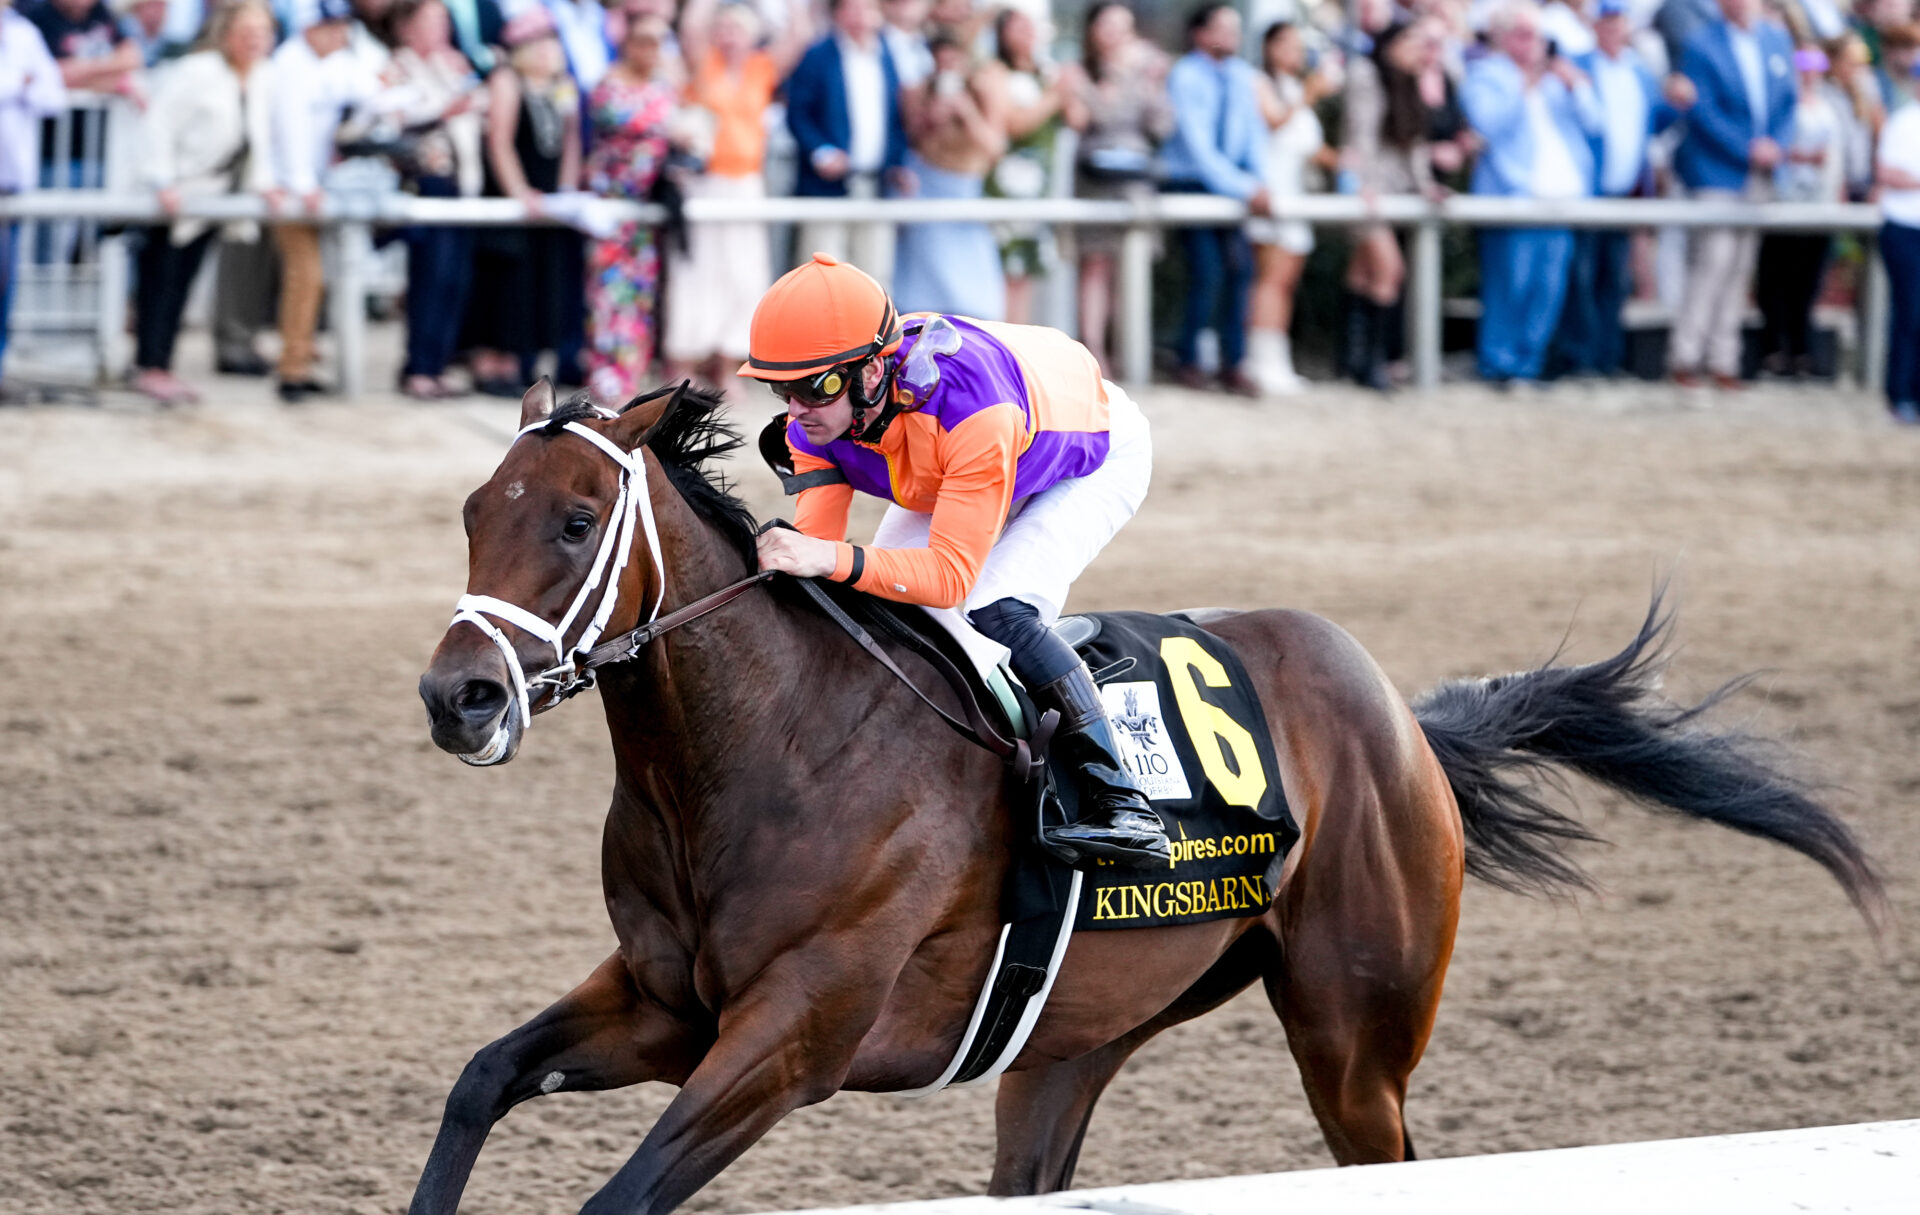 Why Kingsbarns Should Be Your Pick To Win The 2023 Kentucky Derby